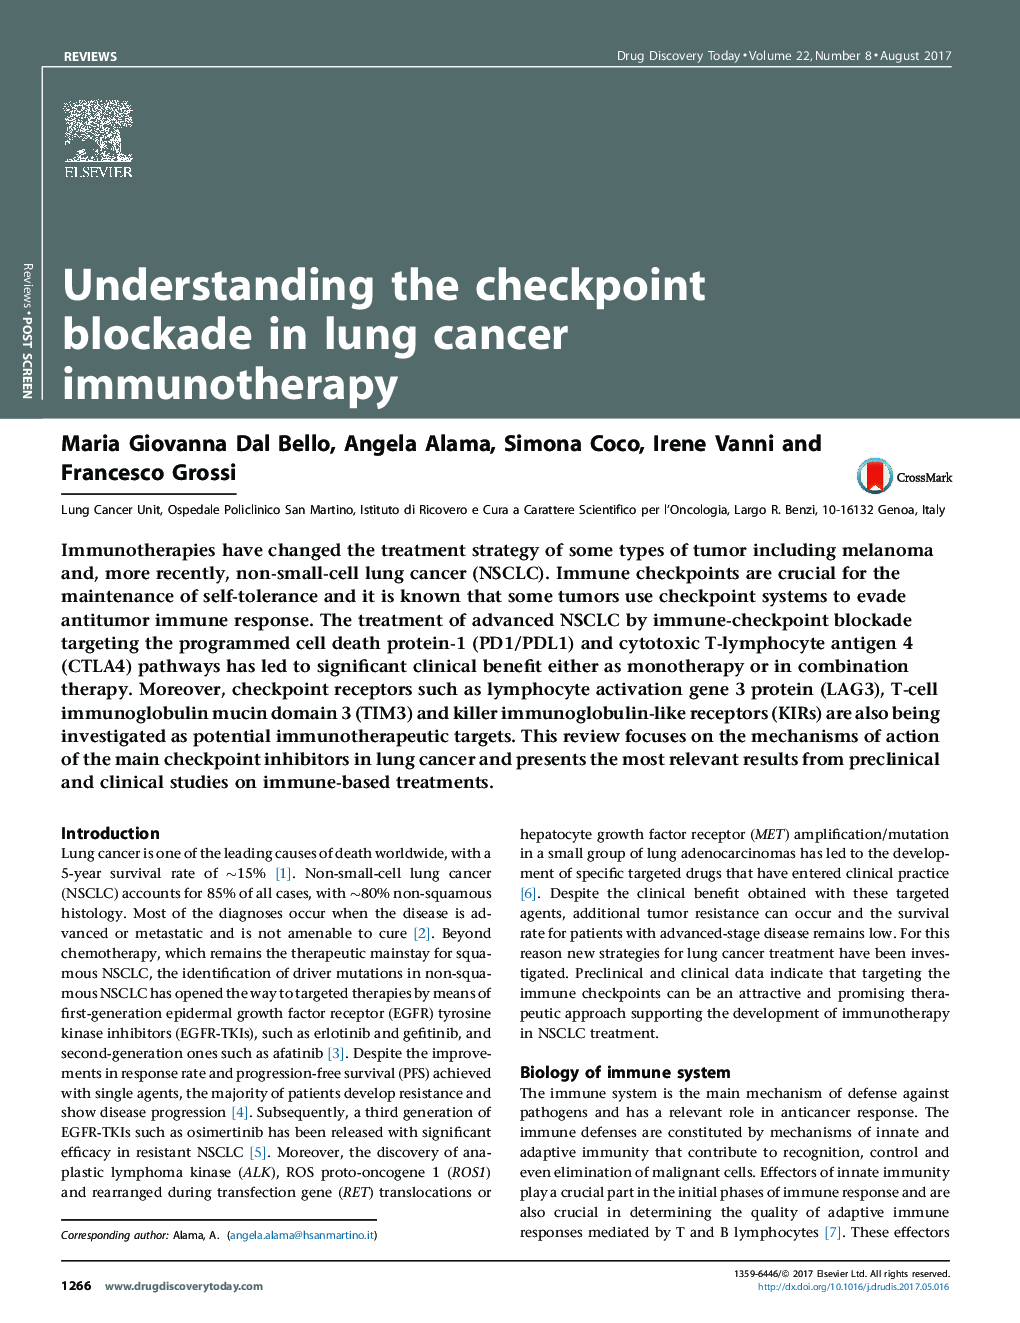 ReviewPost screenUnderstanding the checkpoint blockade in lung cancer immunotherapy